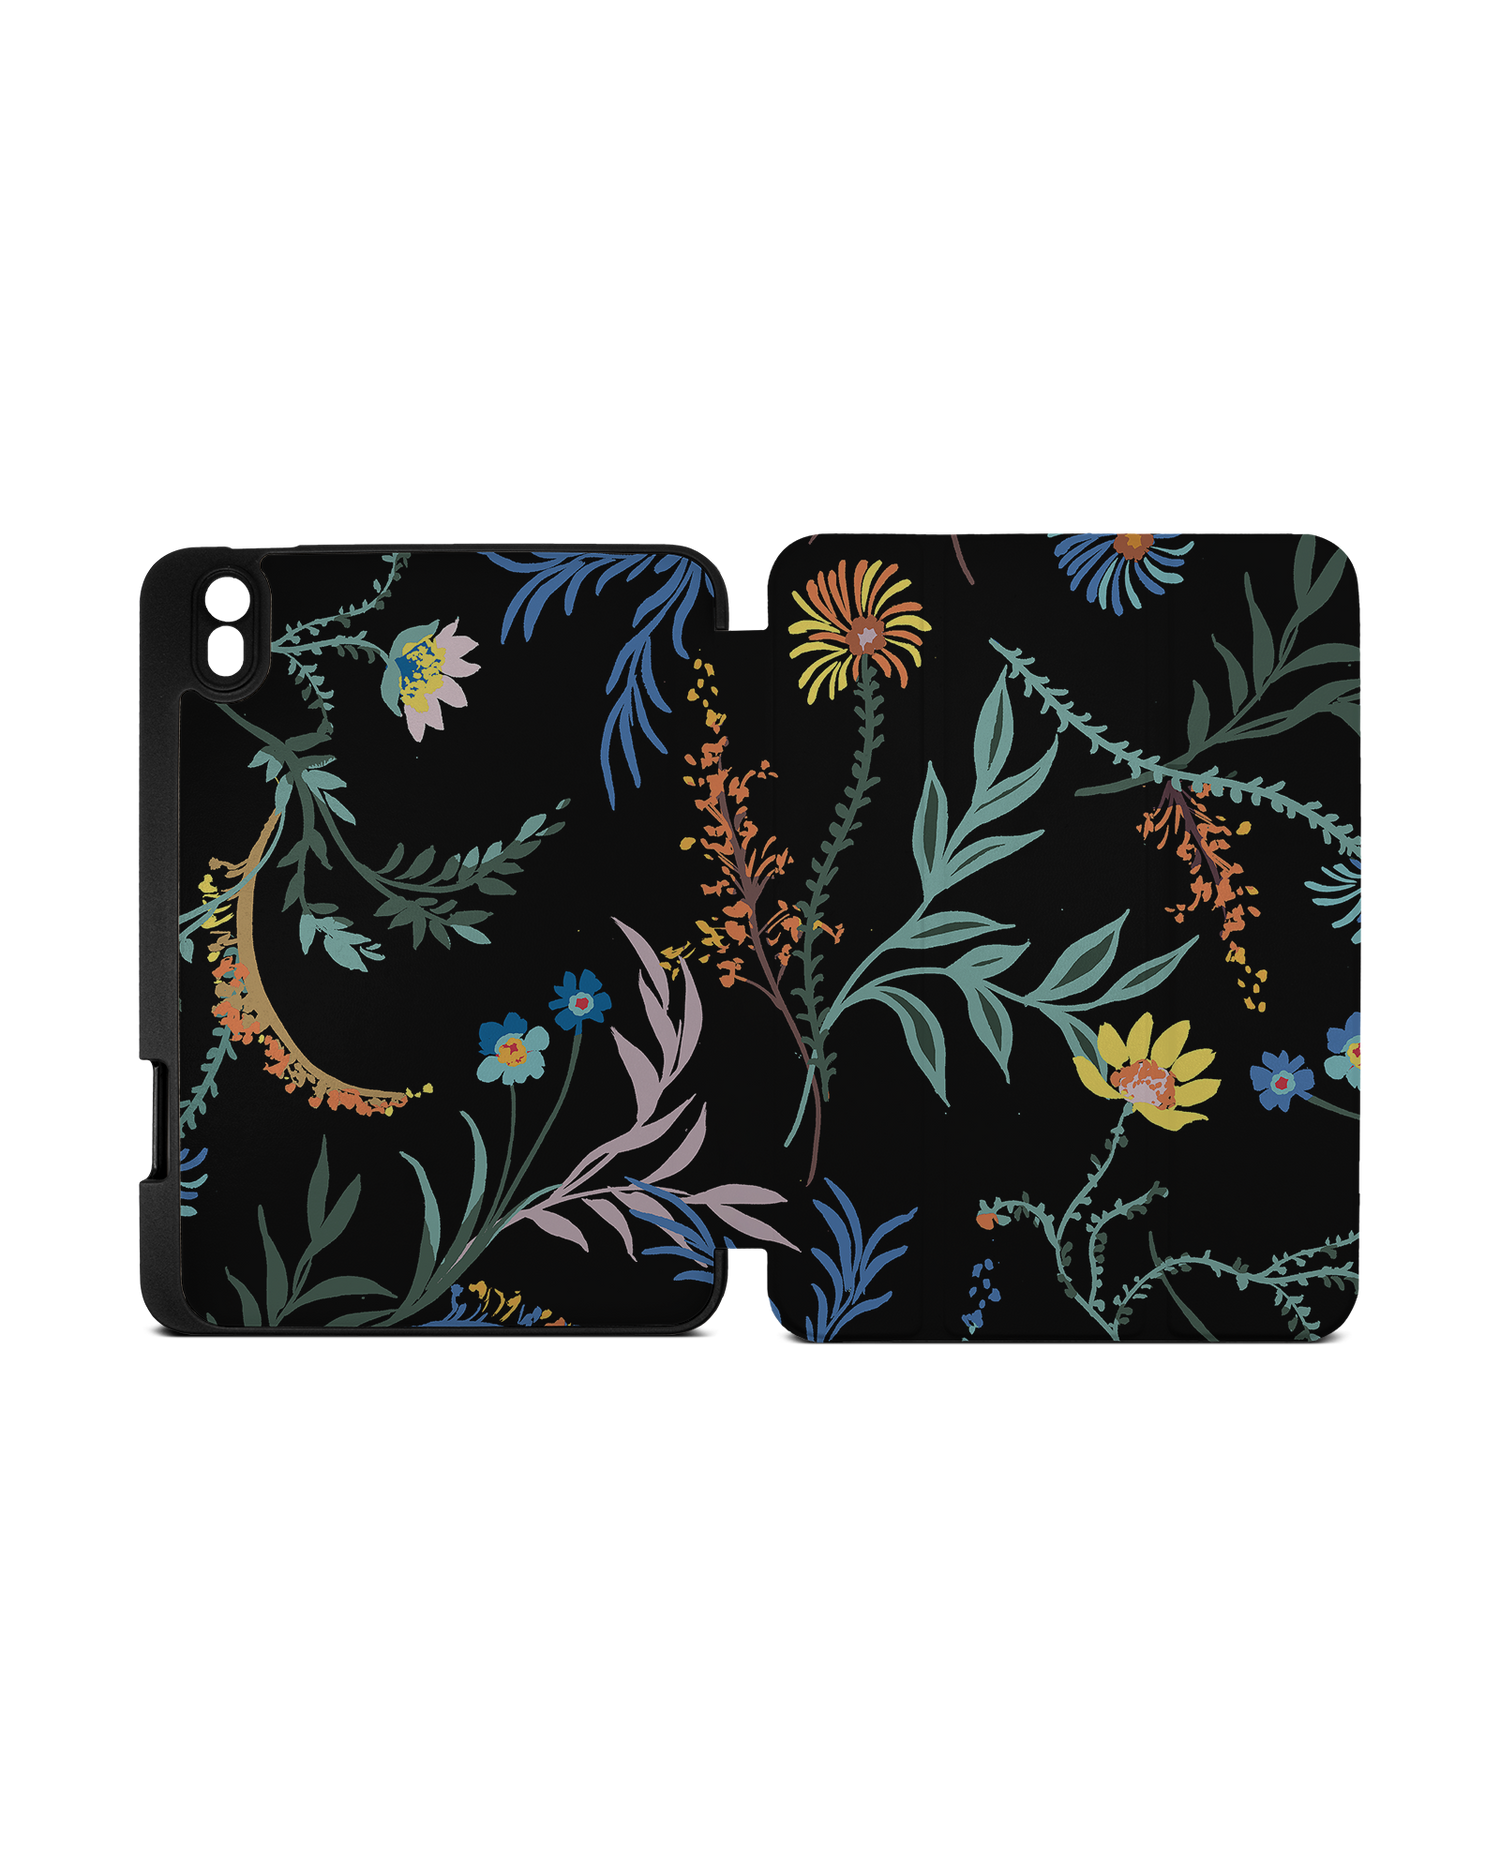 Woodland Spring Floral iPad Case with Pencil Holder Apple iPad mini 6 (2021): Opened exterior view